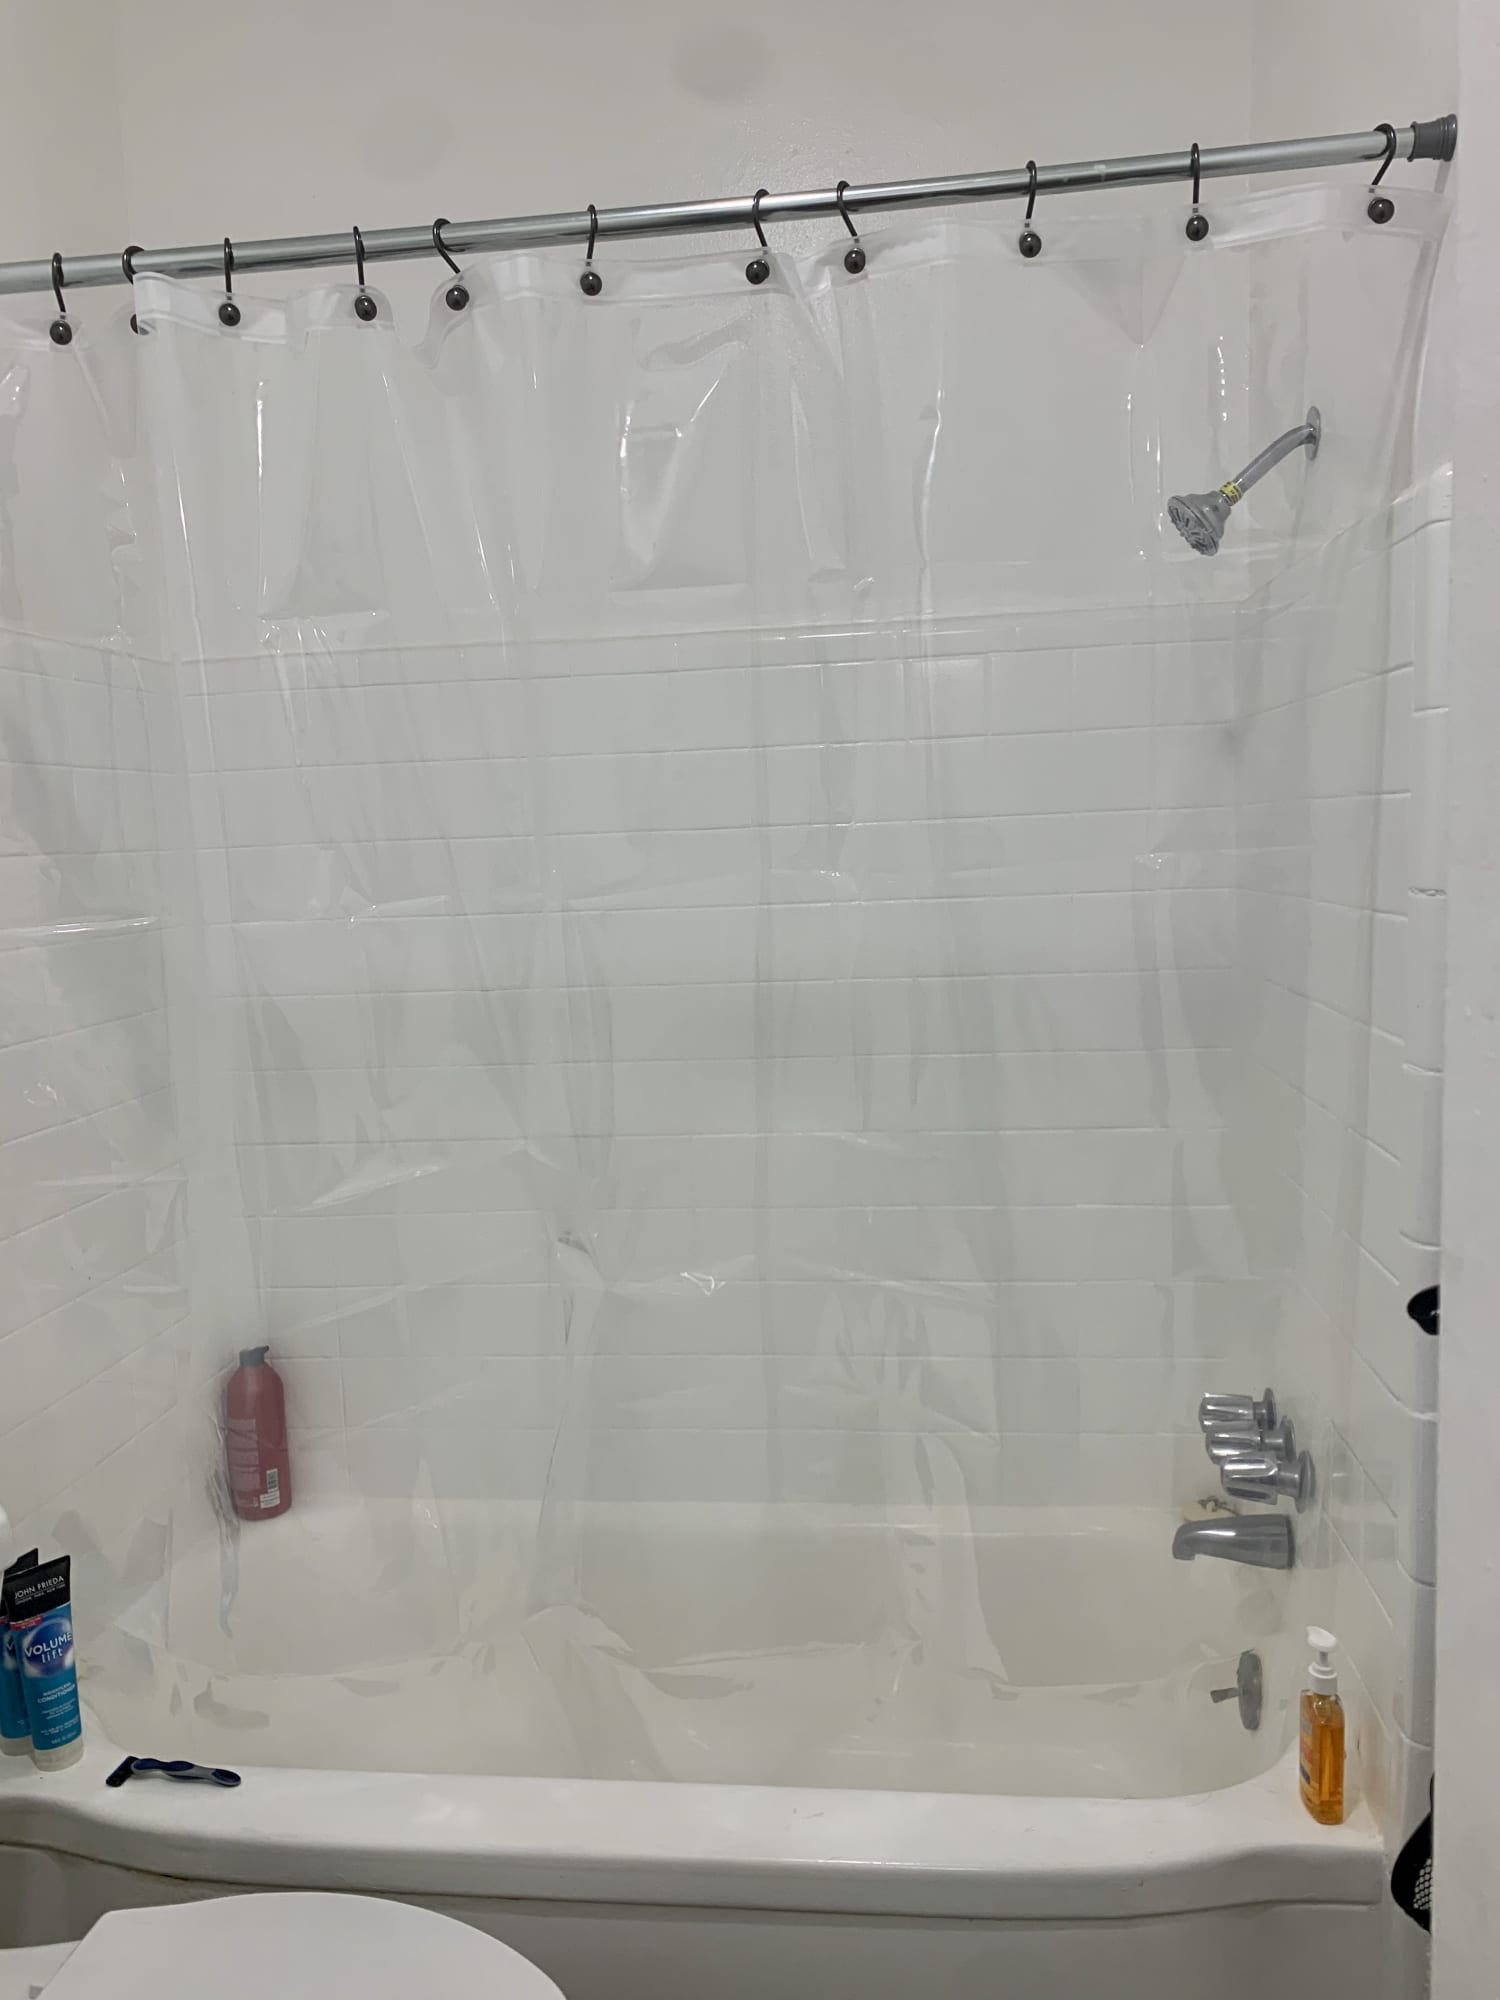 This Is The Best Shower Curtain Liner, What Shower Curtain Material Does Not Need A Liner